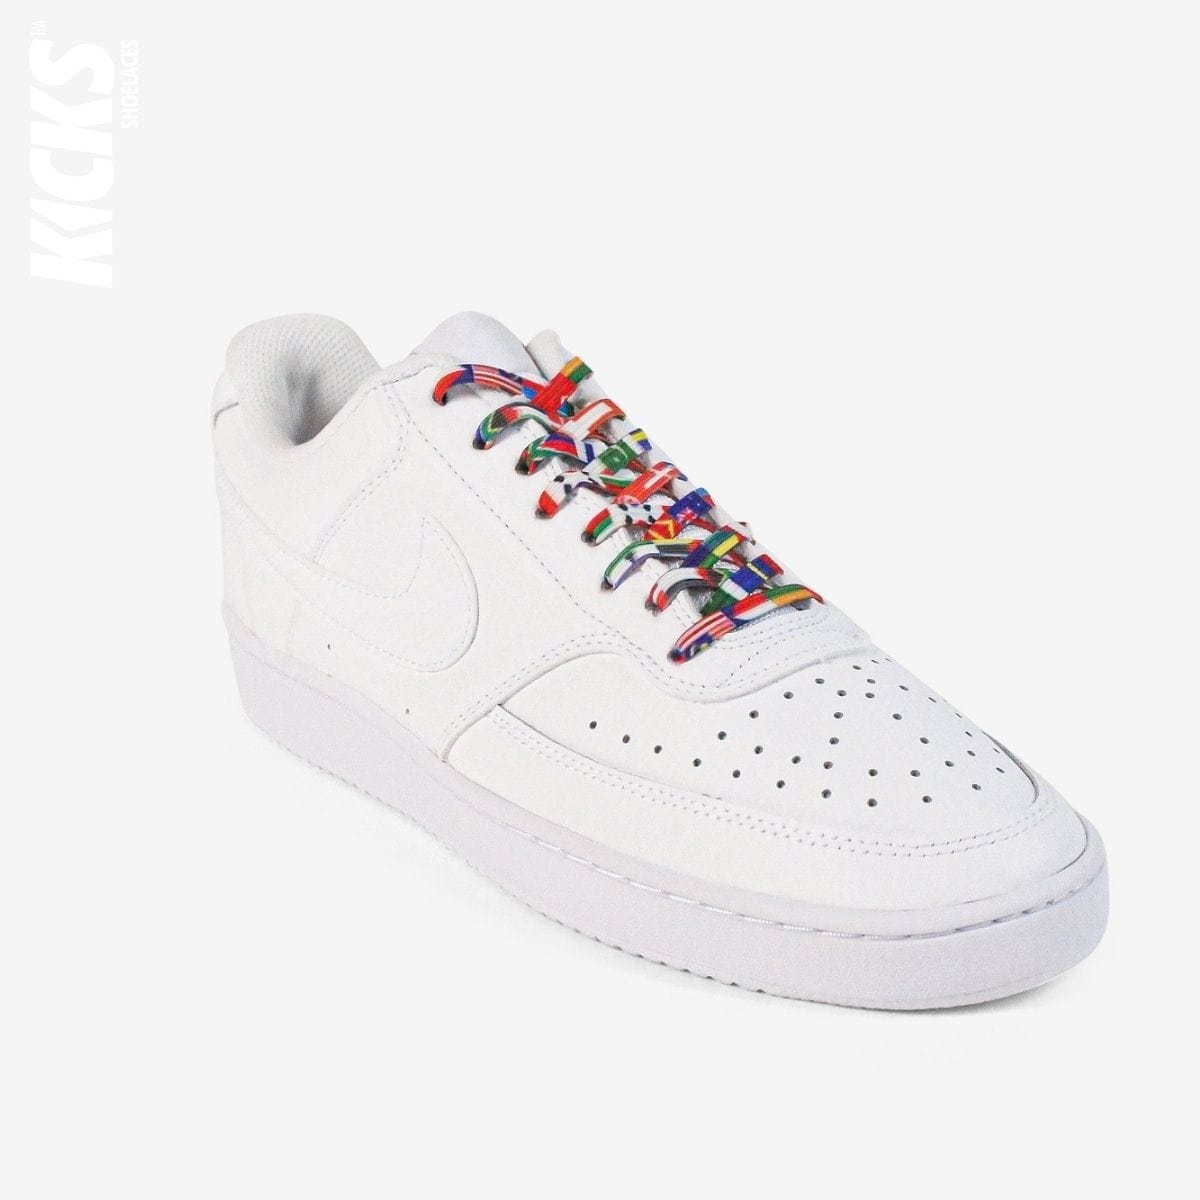 elastic-no-tie-shoelaces-with-national-flags-laces-on-nike-white-sneakers